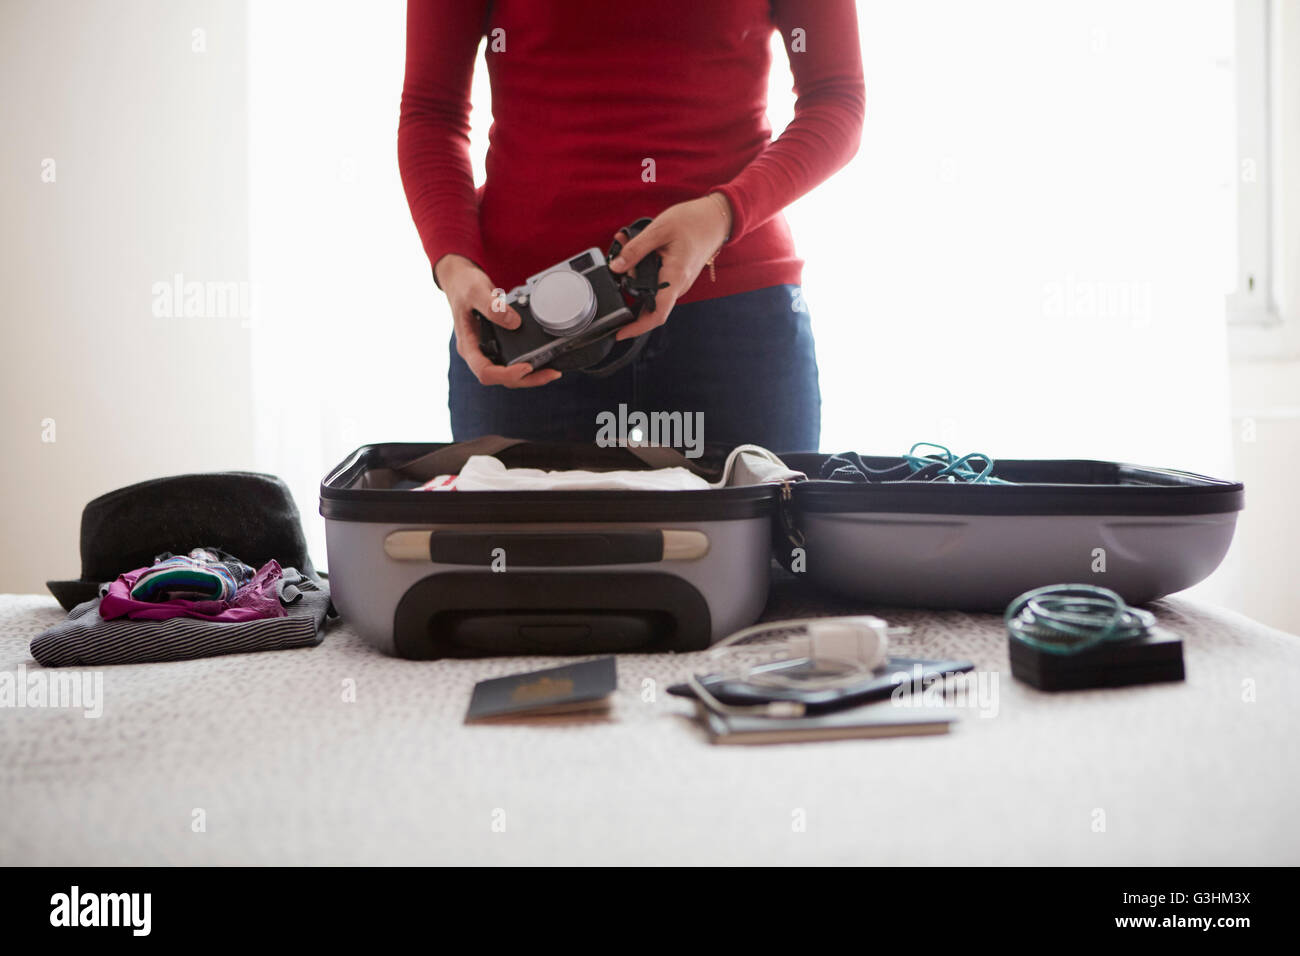 Woman packing suitcase, holding camera, mid section Stock Photo